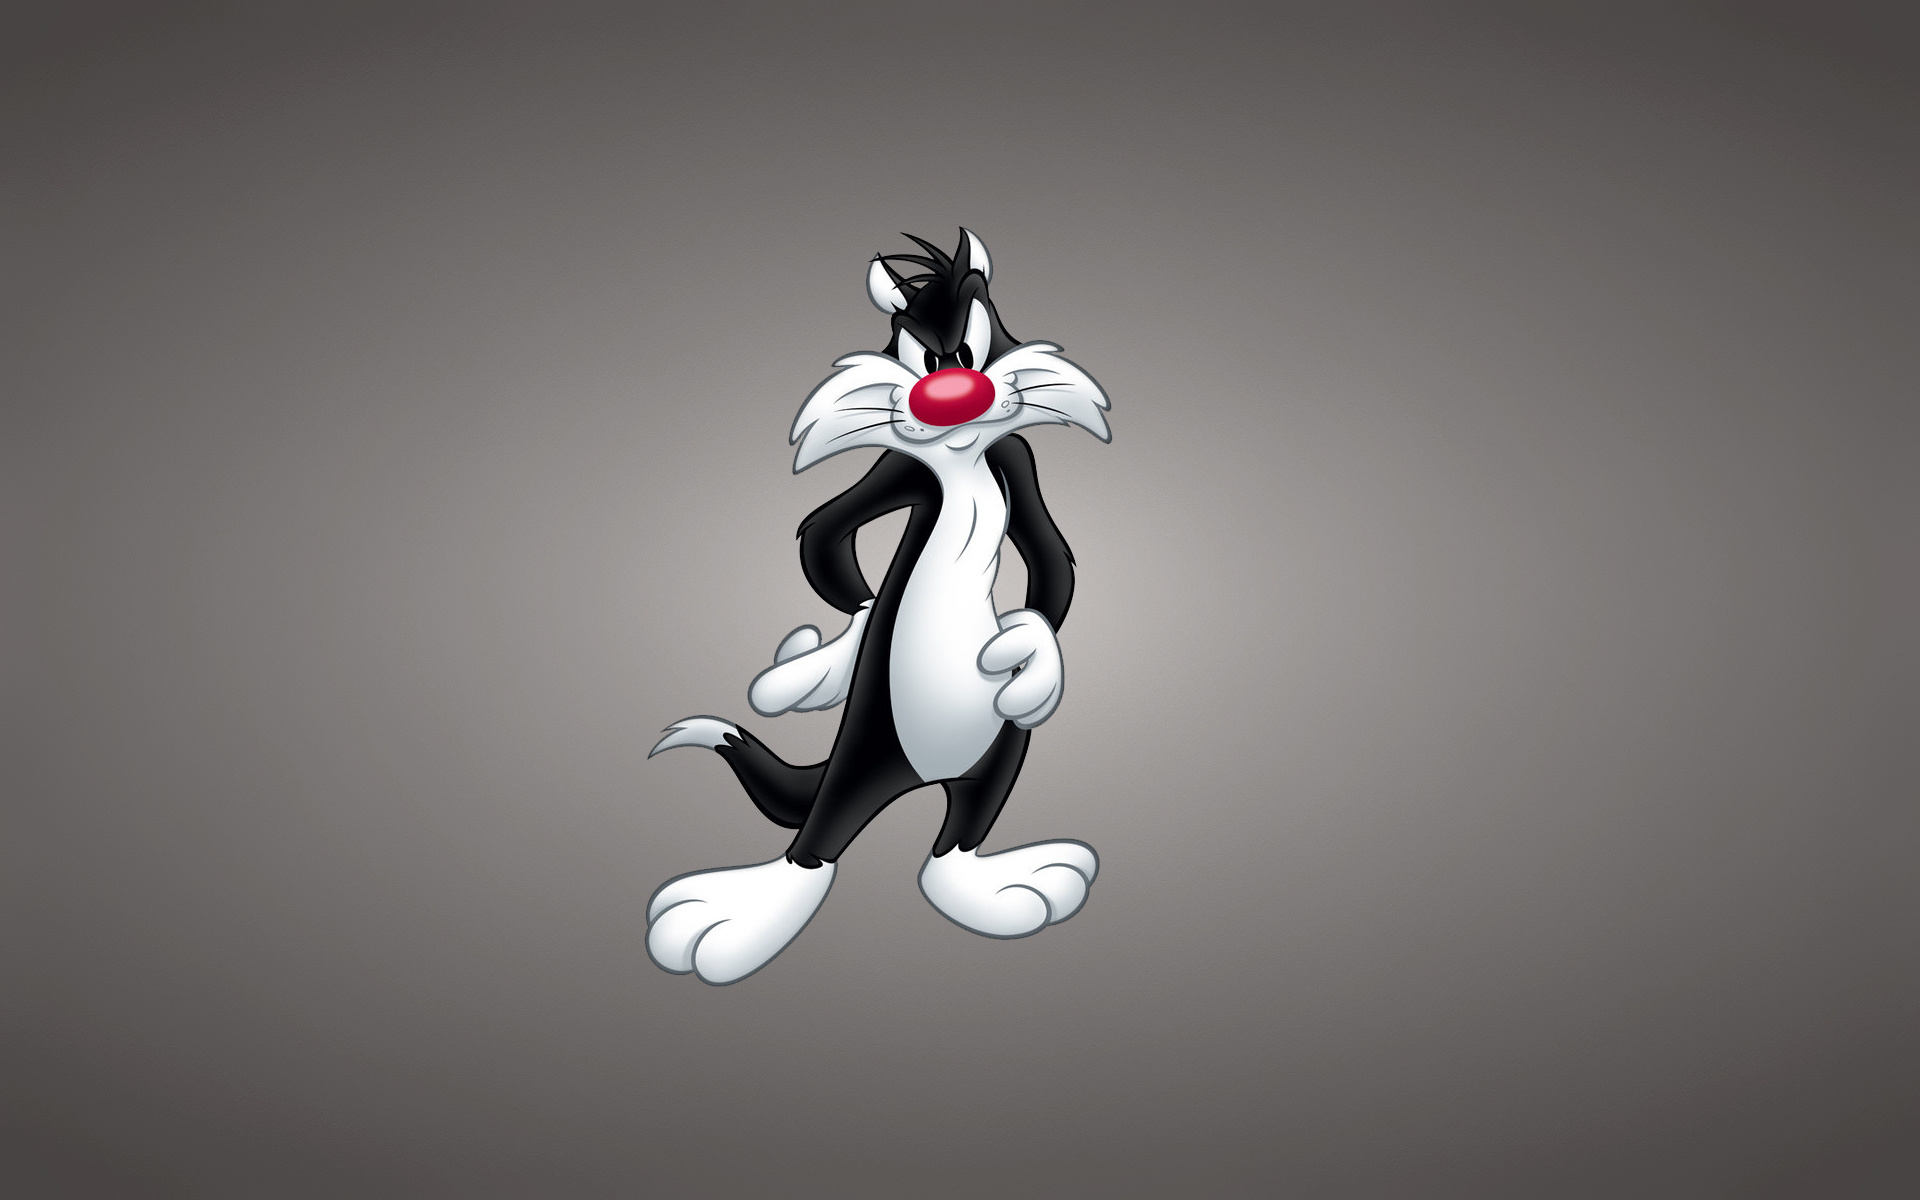 Sylvester the Cat, Looney Tunes wallpapers, Classic characters, Nostalgic, 1920x1200 HD Desktop